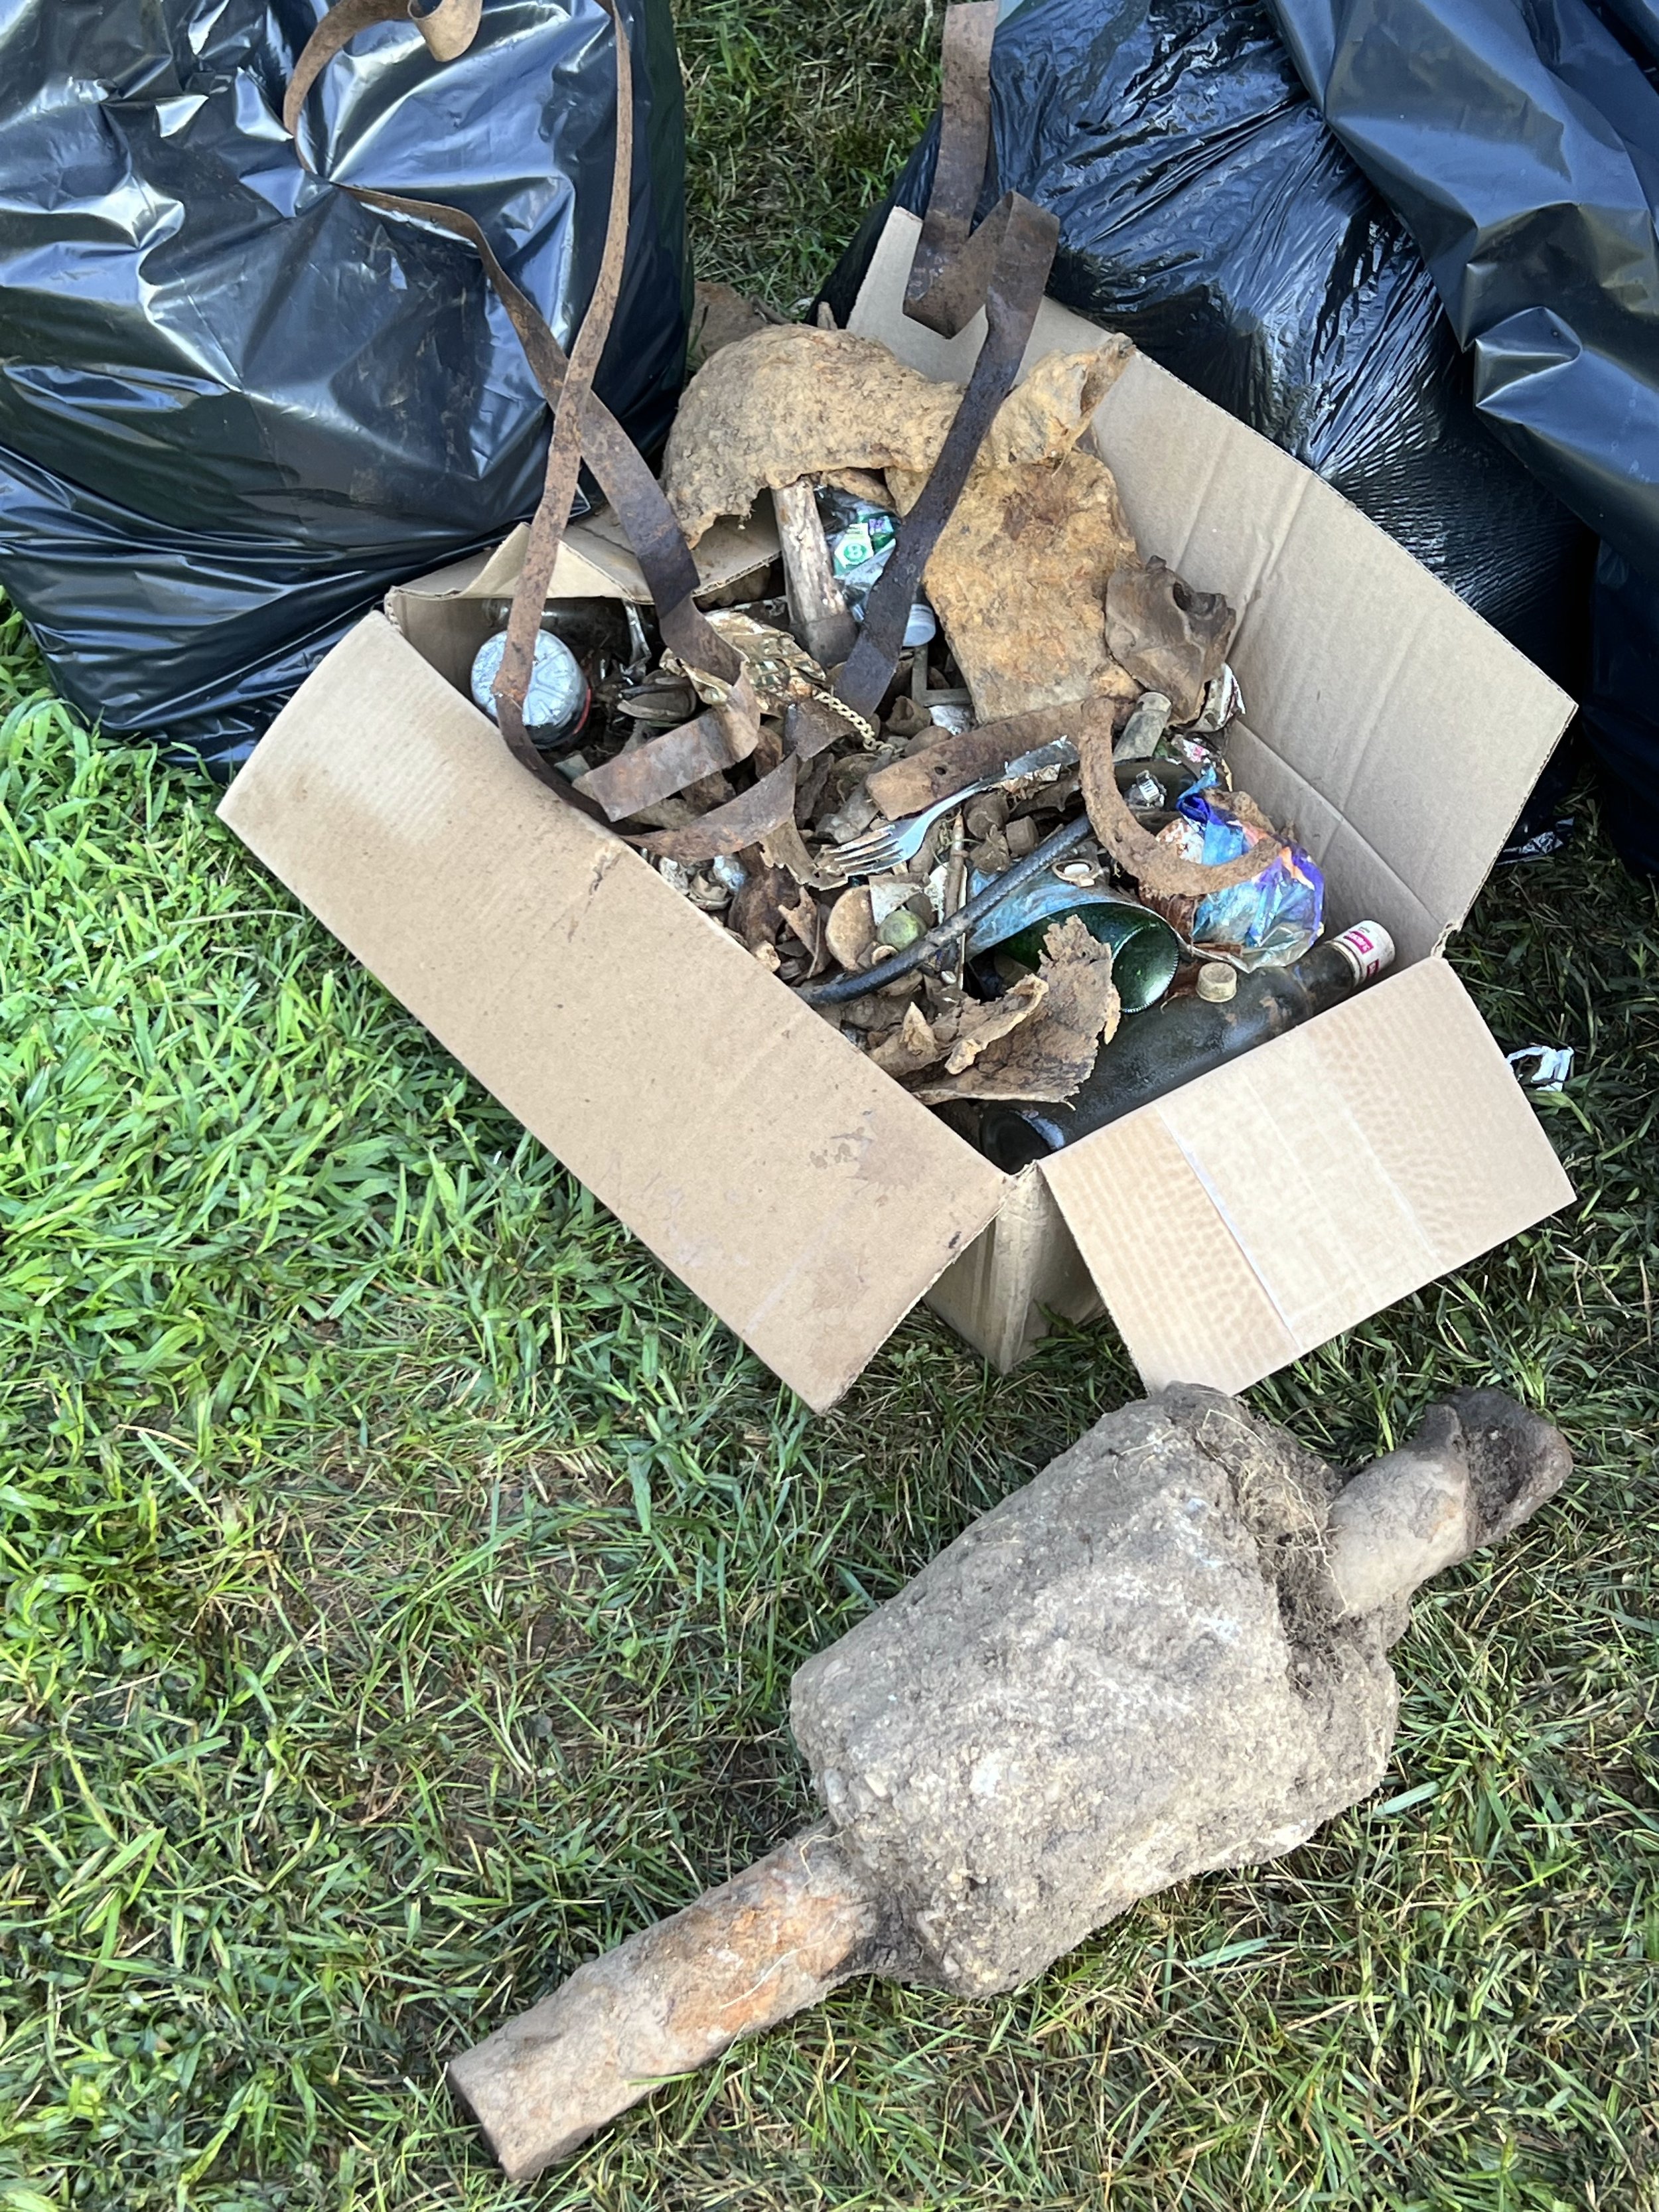 Metal finds and bottles to be recycled or discarded. Aside from relic hunting, detectorists clear trash and recyclables while detecting, leaving areas they explore better than when they started.